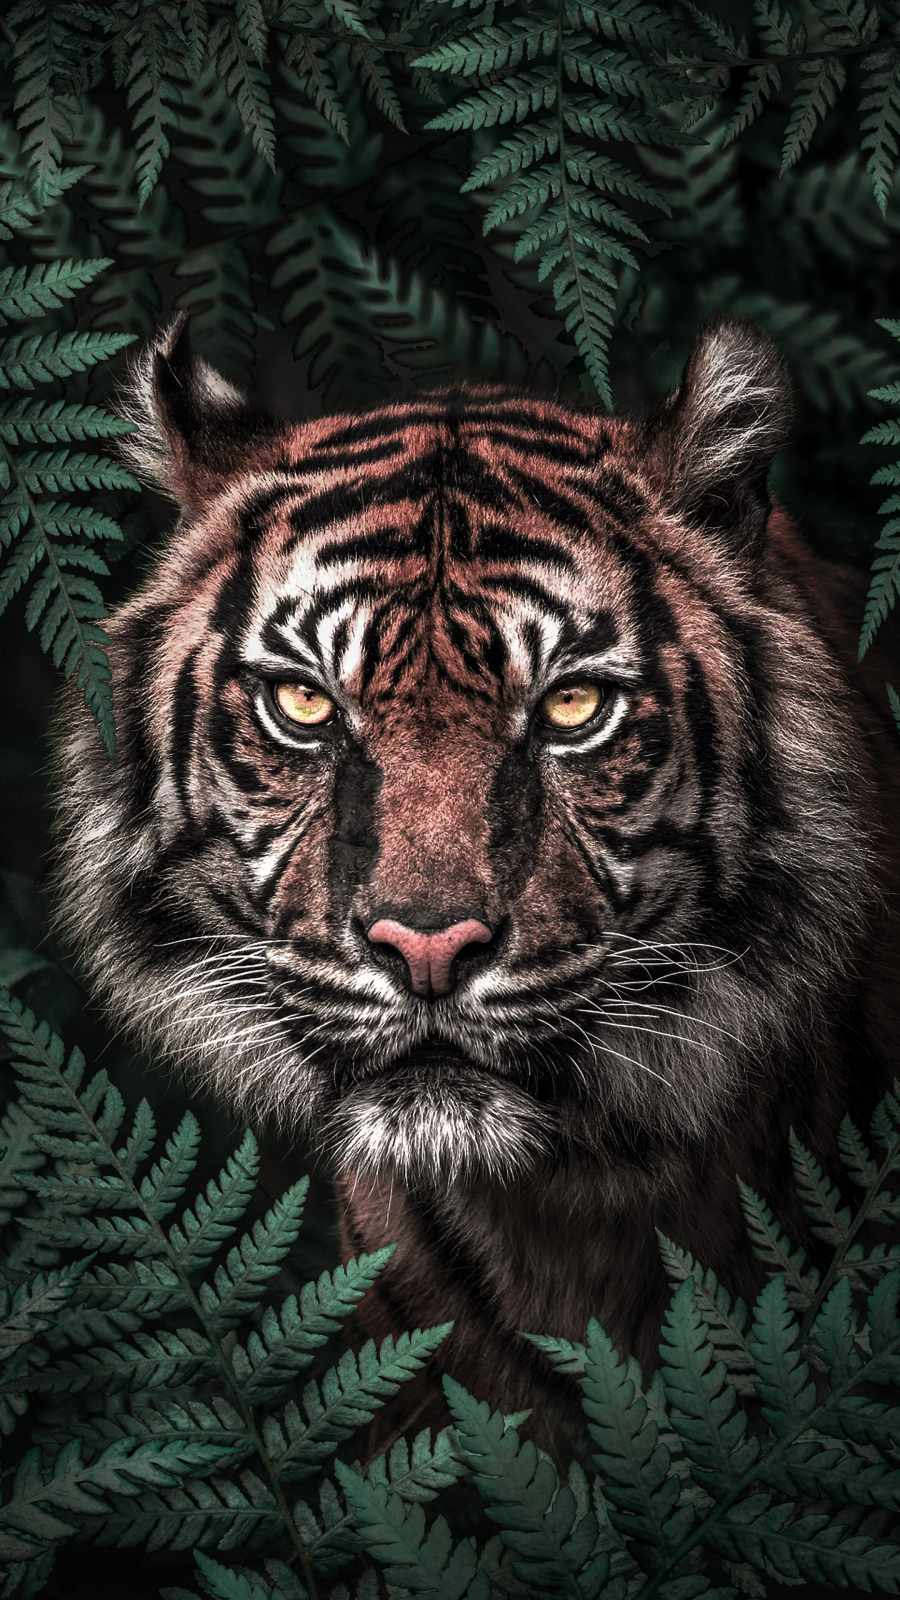 Tiger in Forest iPhone Wallpaper